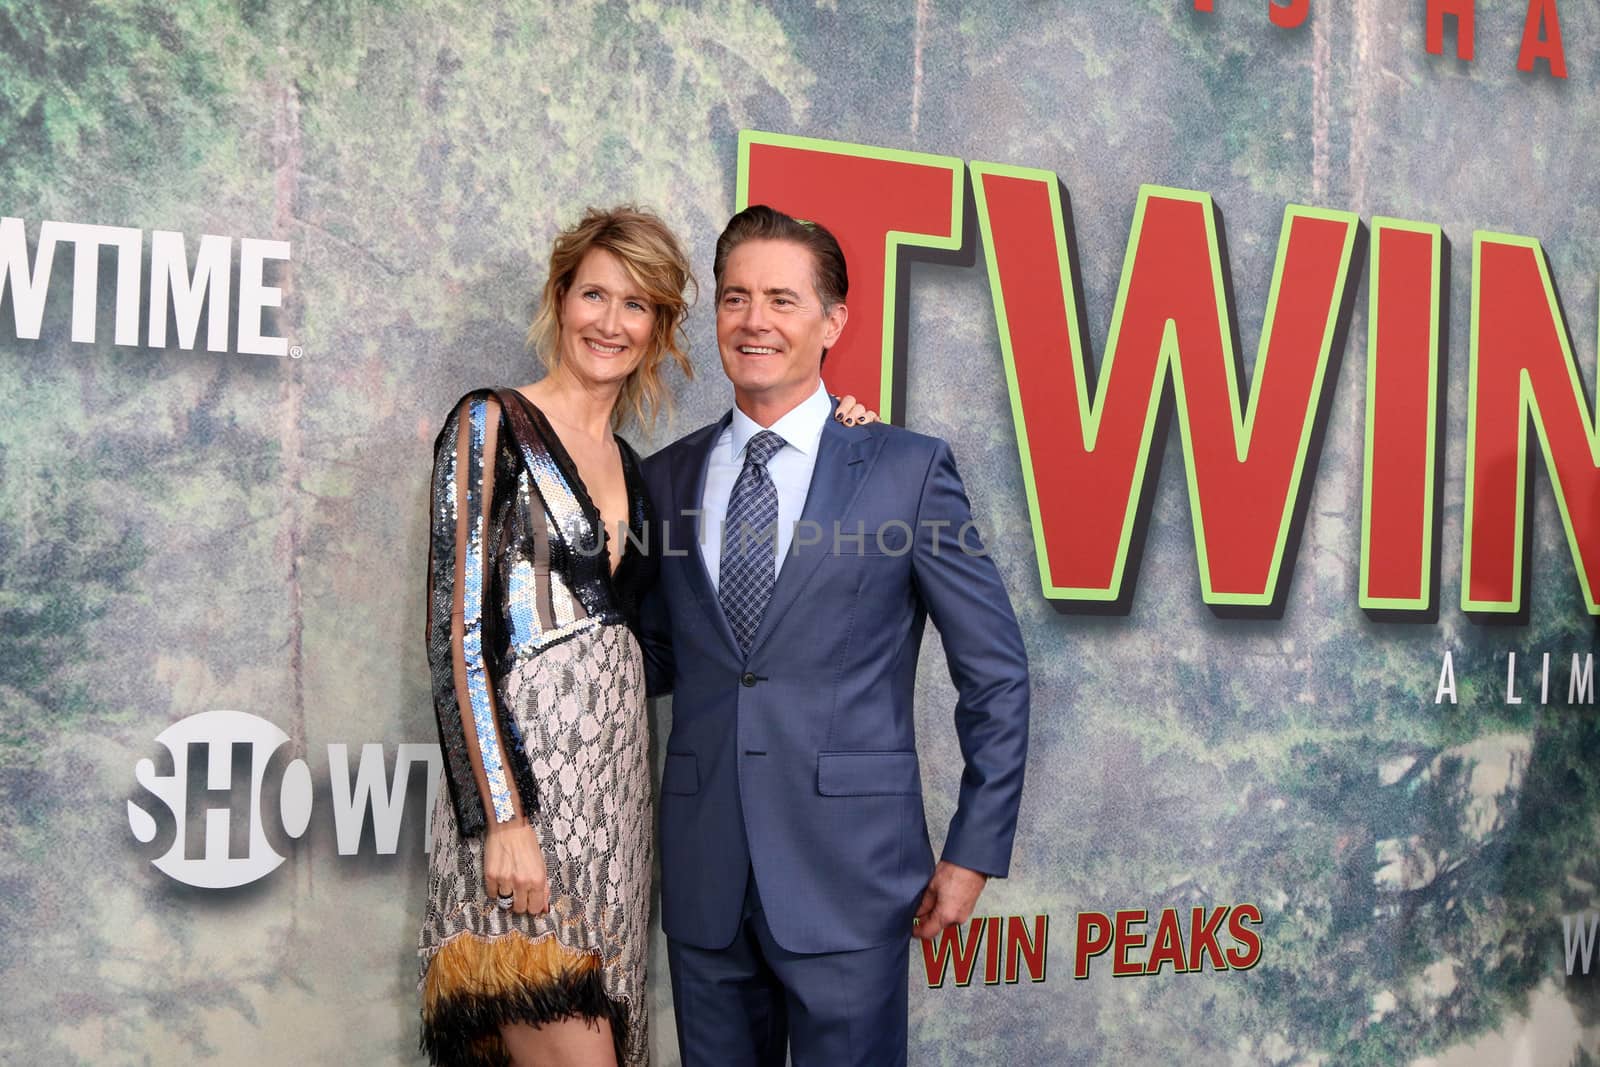 Laura Dern, Kyle MacLachlan
at the "Twin Peaks" Premiere Screening, The Theater at Ace Hotel, Los Angeles, CA 05-19-17